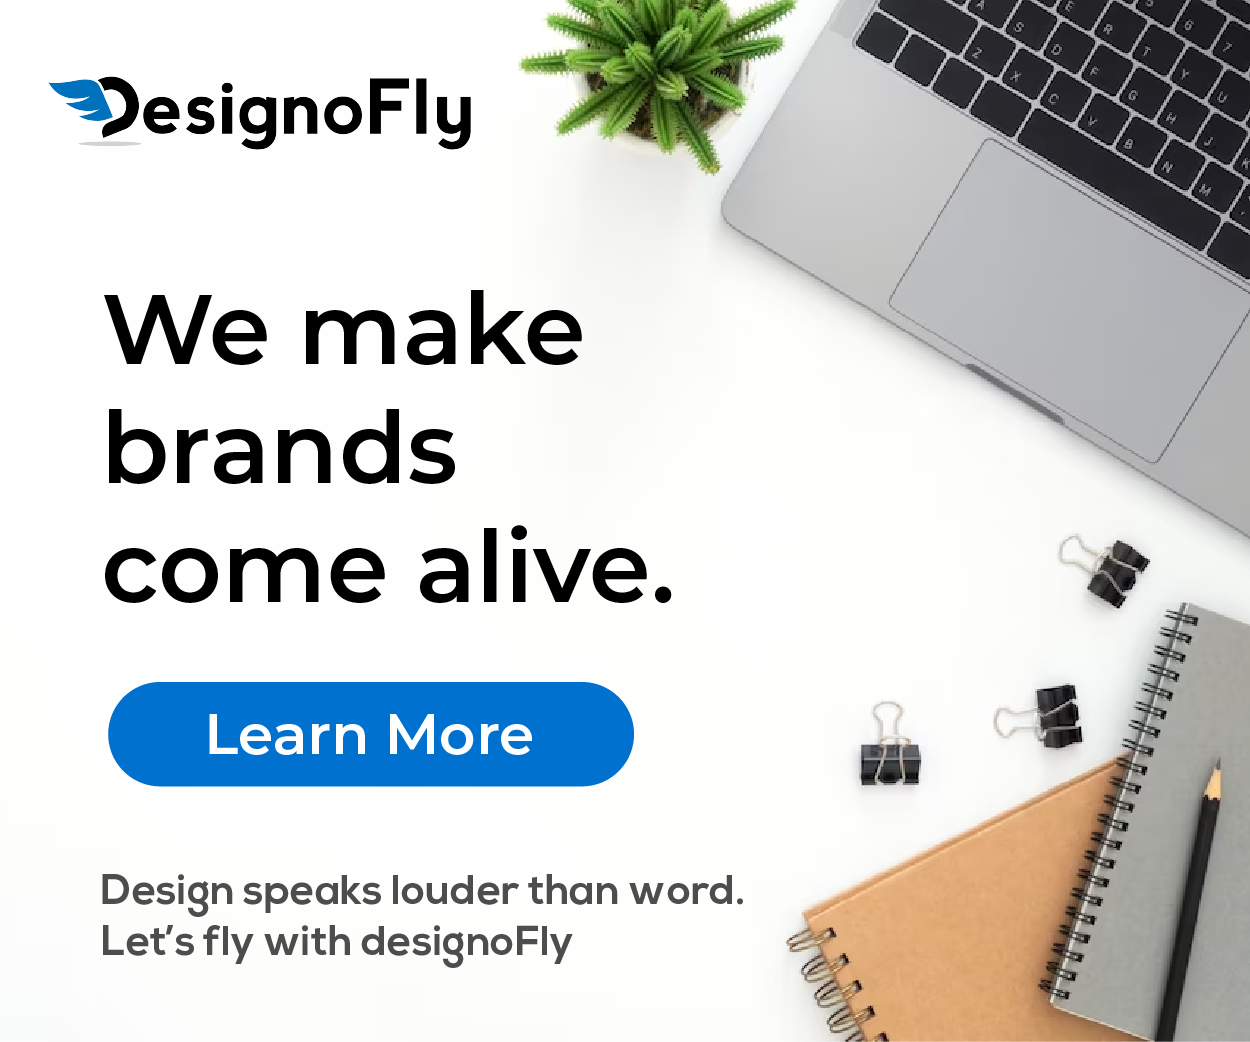 DesignoFly Web ads. Feel free to visit www.designofly.com to know more about our services